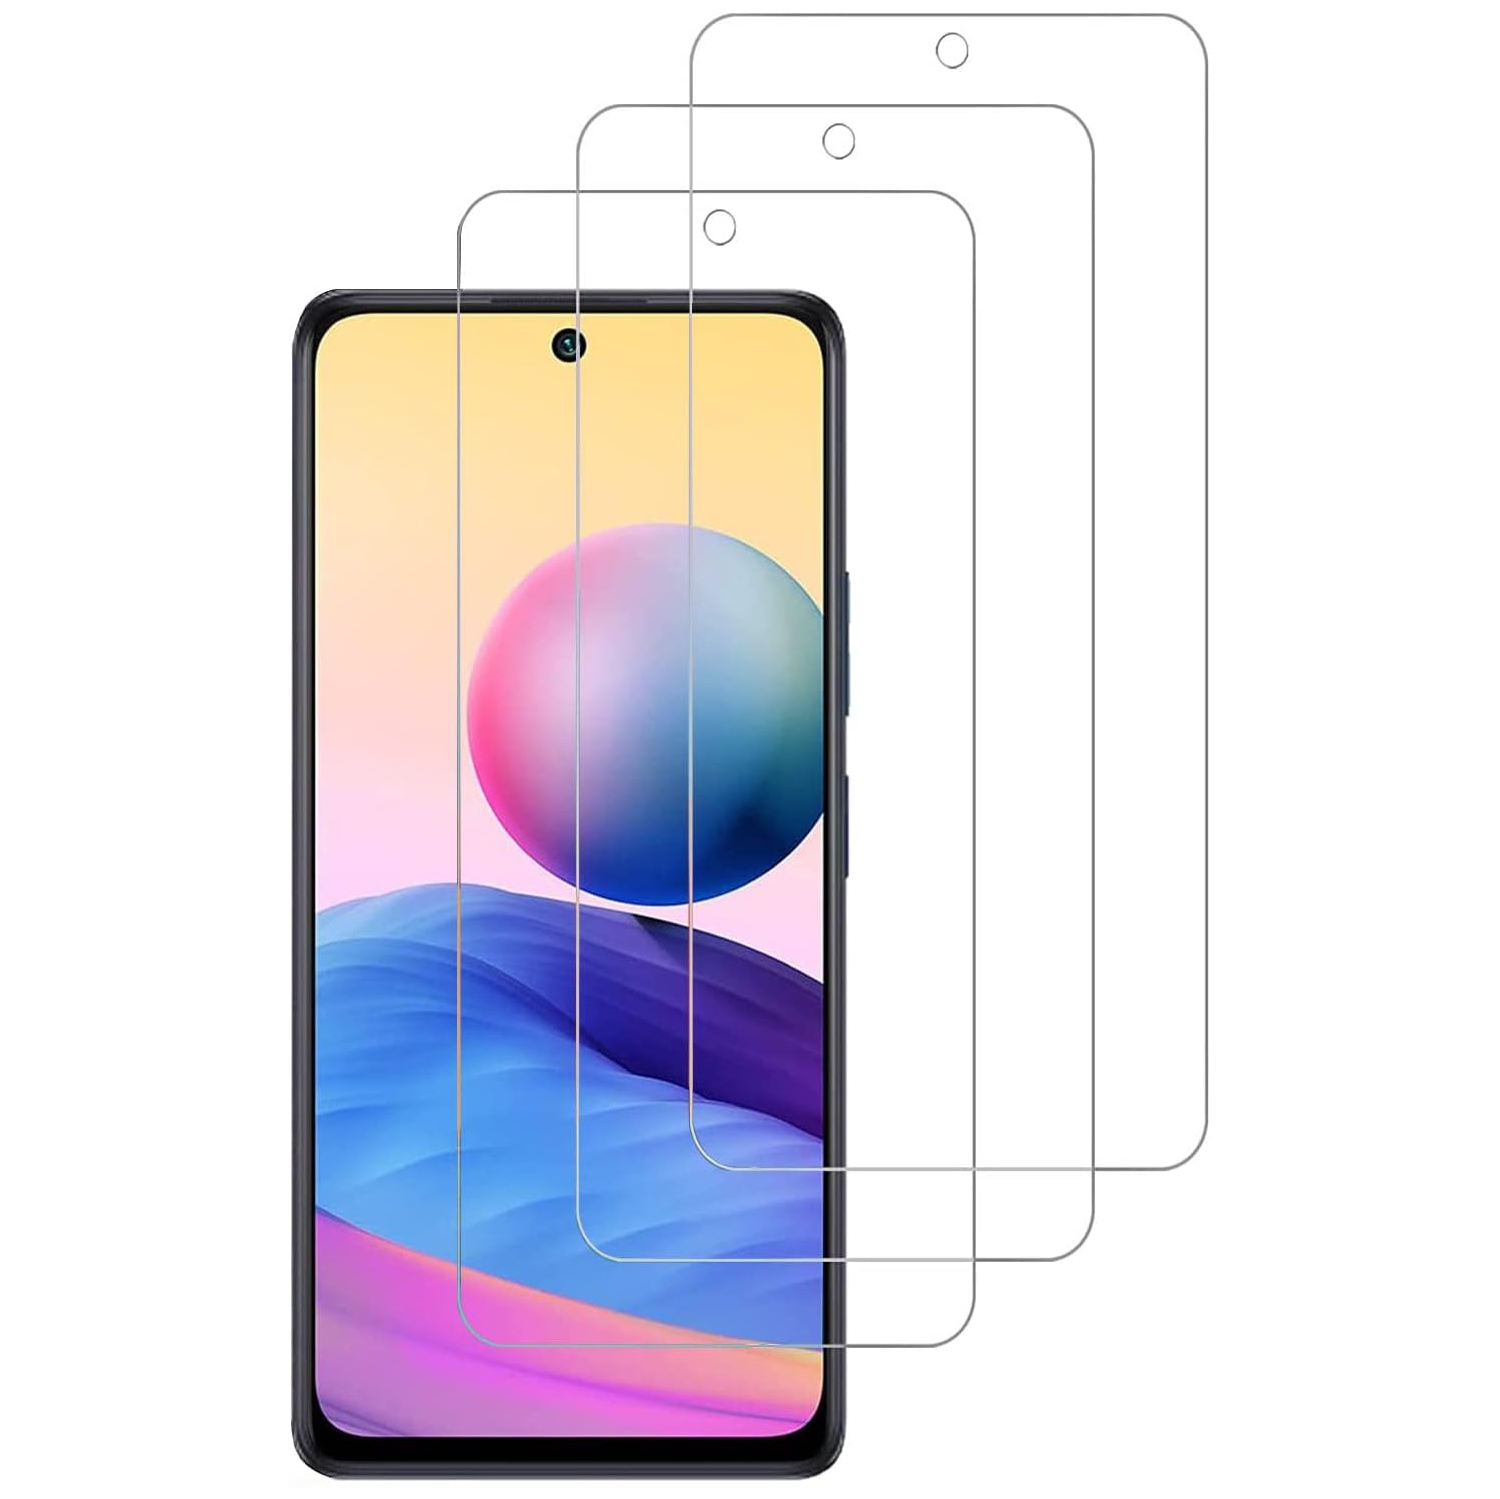 Screen Protector for Xiaomi Redmi Note10/Note10S, [3 Pack ] Full Coverage HD Clear Flexible Film Case Friendly